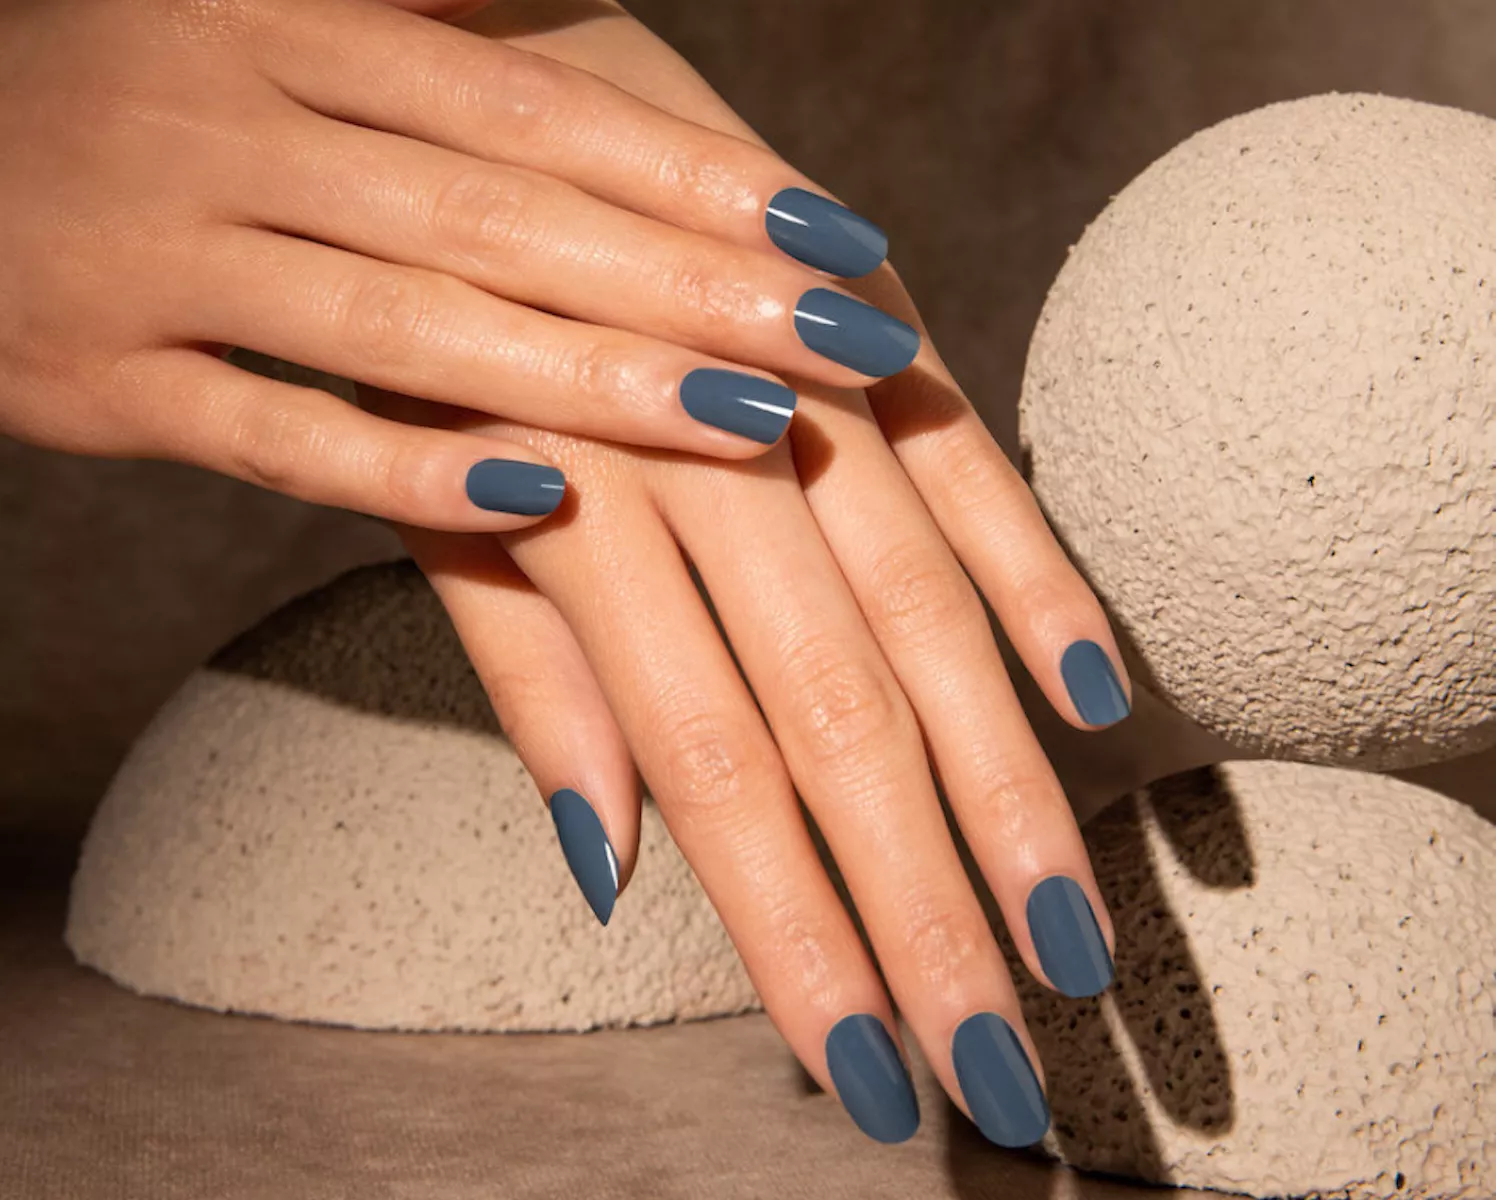 woman's hands with gray-blue manicure